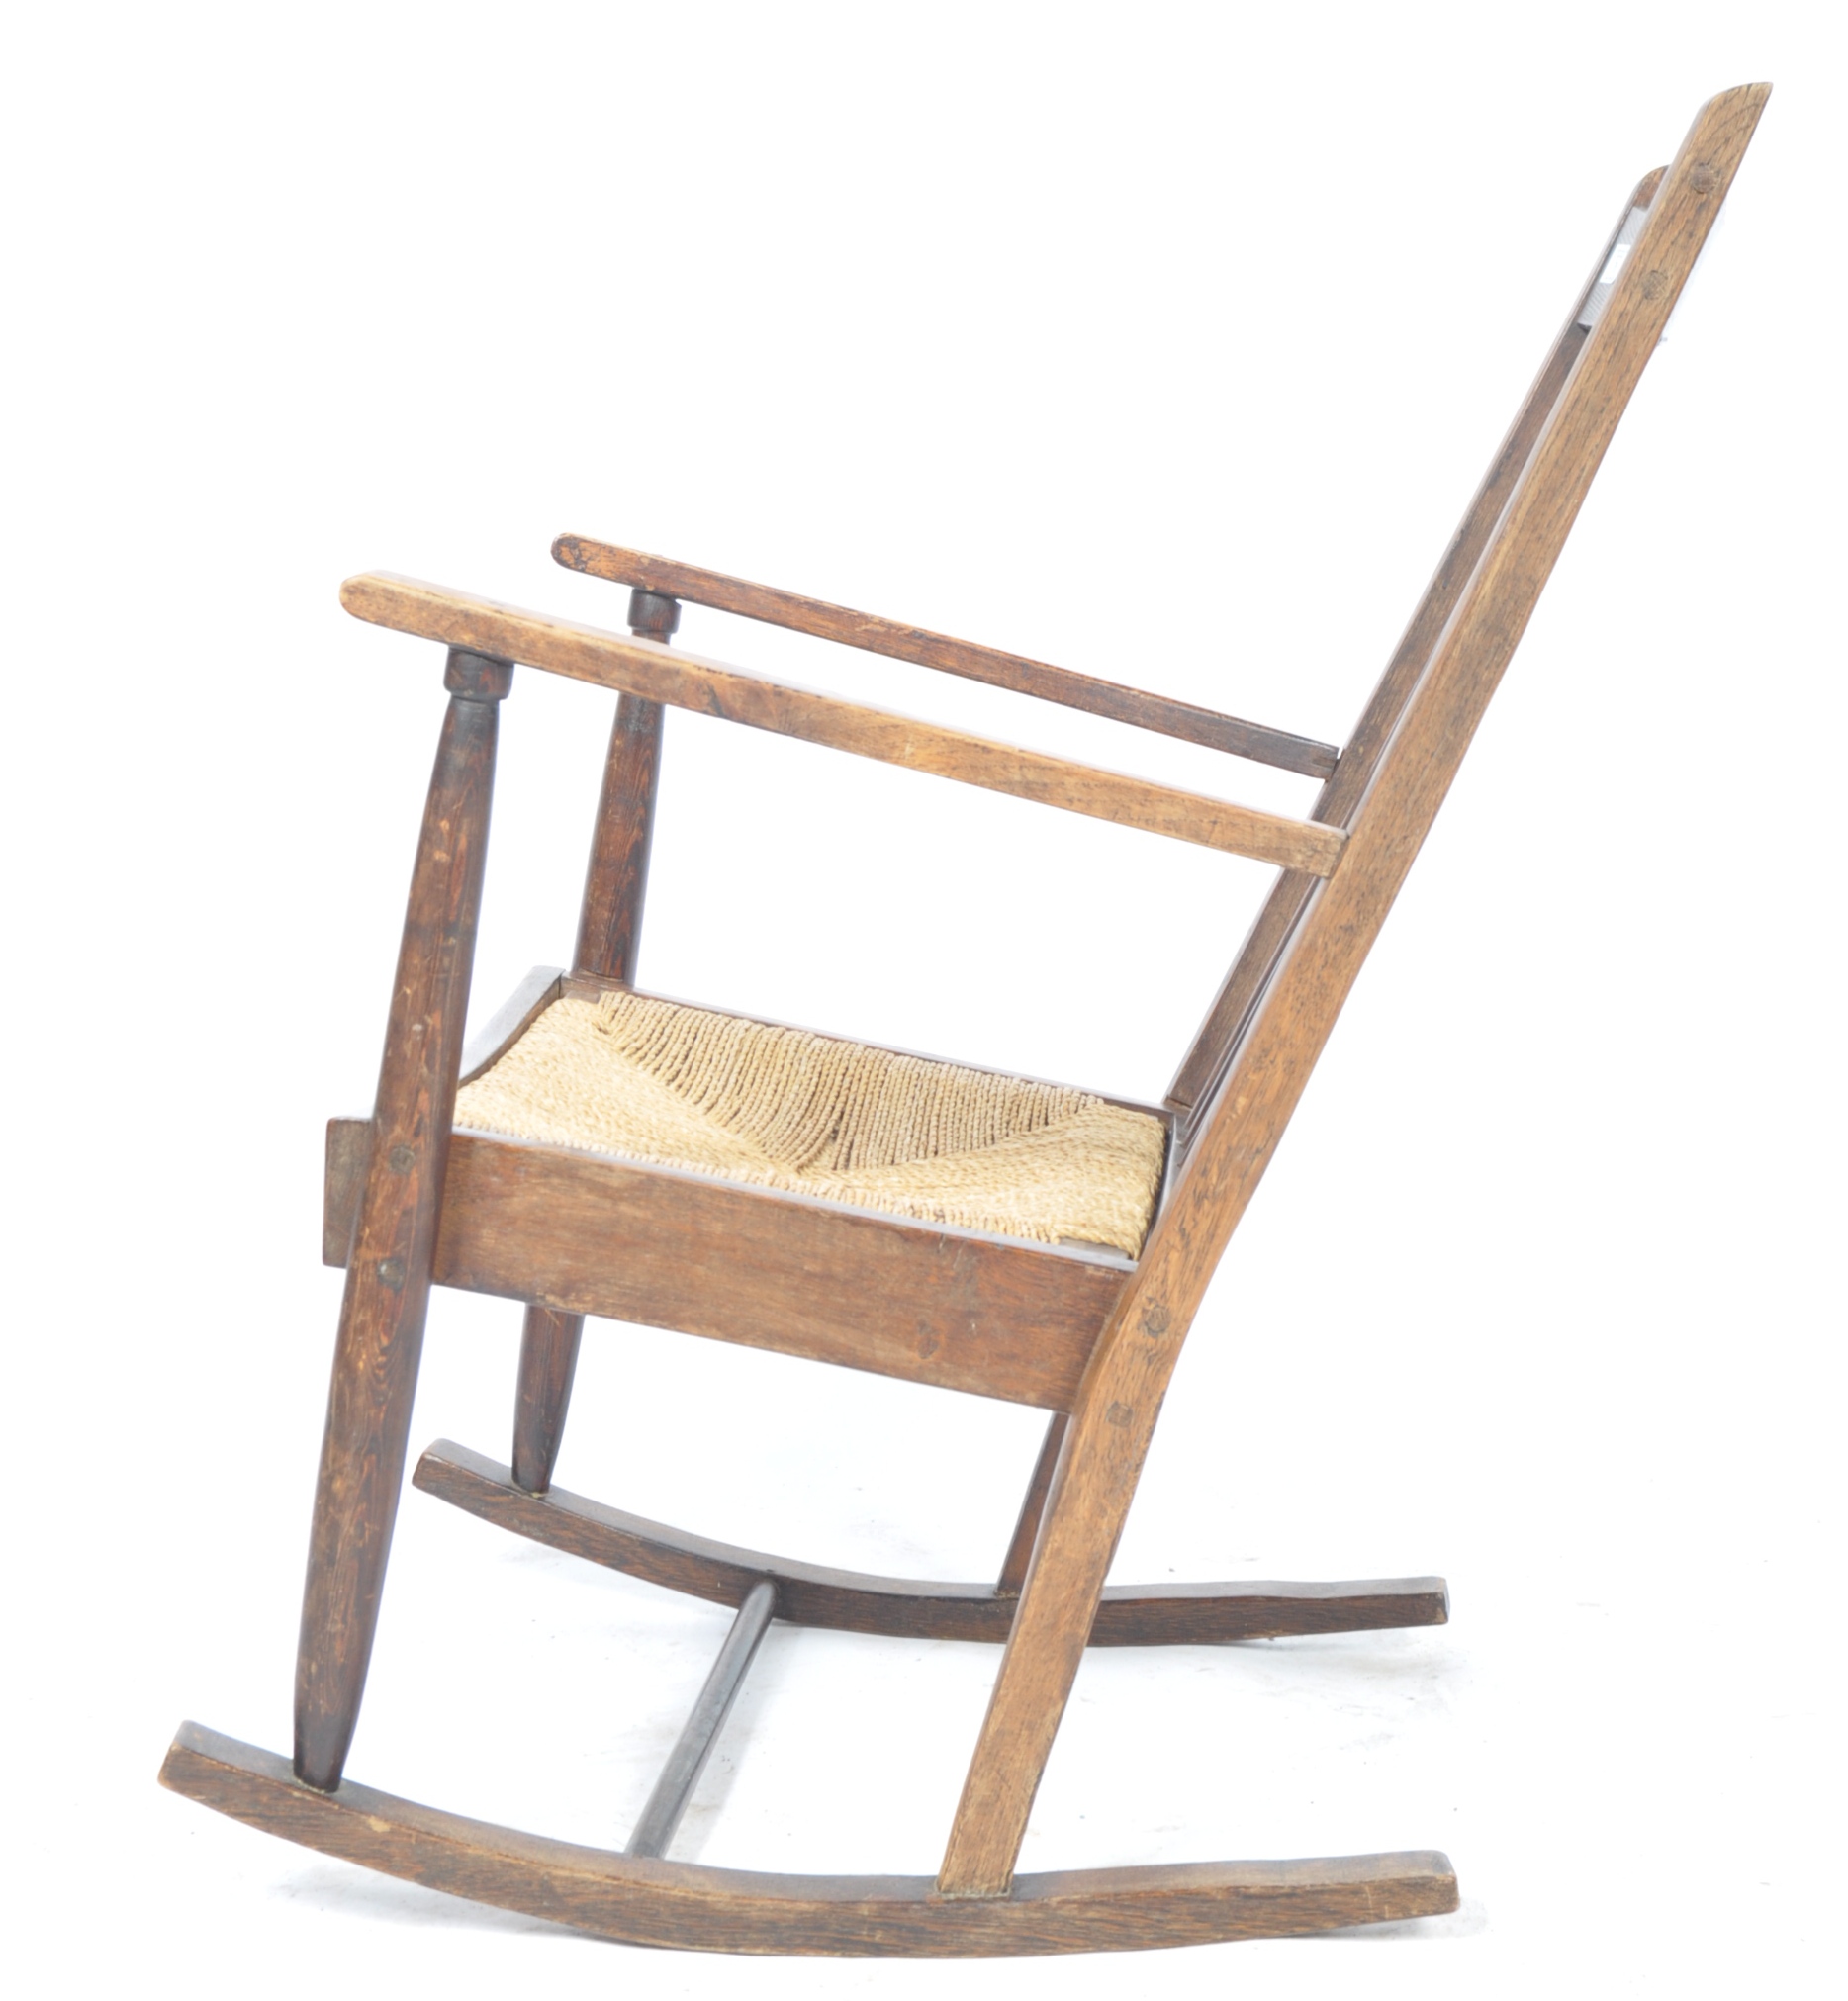 EARLY TO MID 20TH CENTURY BESPOKE MADE OAK ROCKING CHAIR - Image 4 of 5